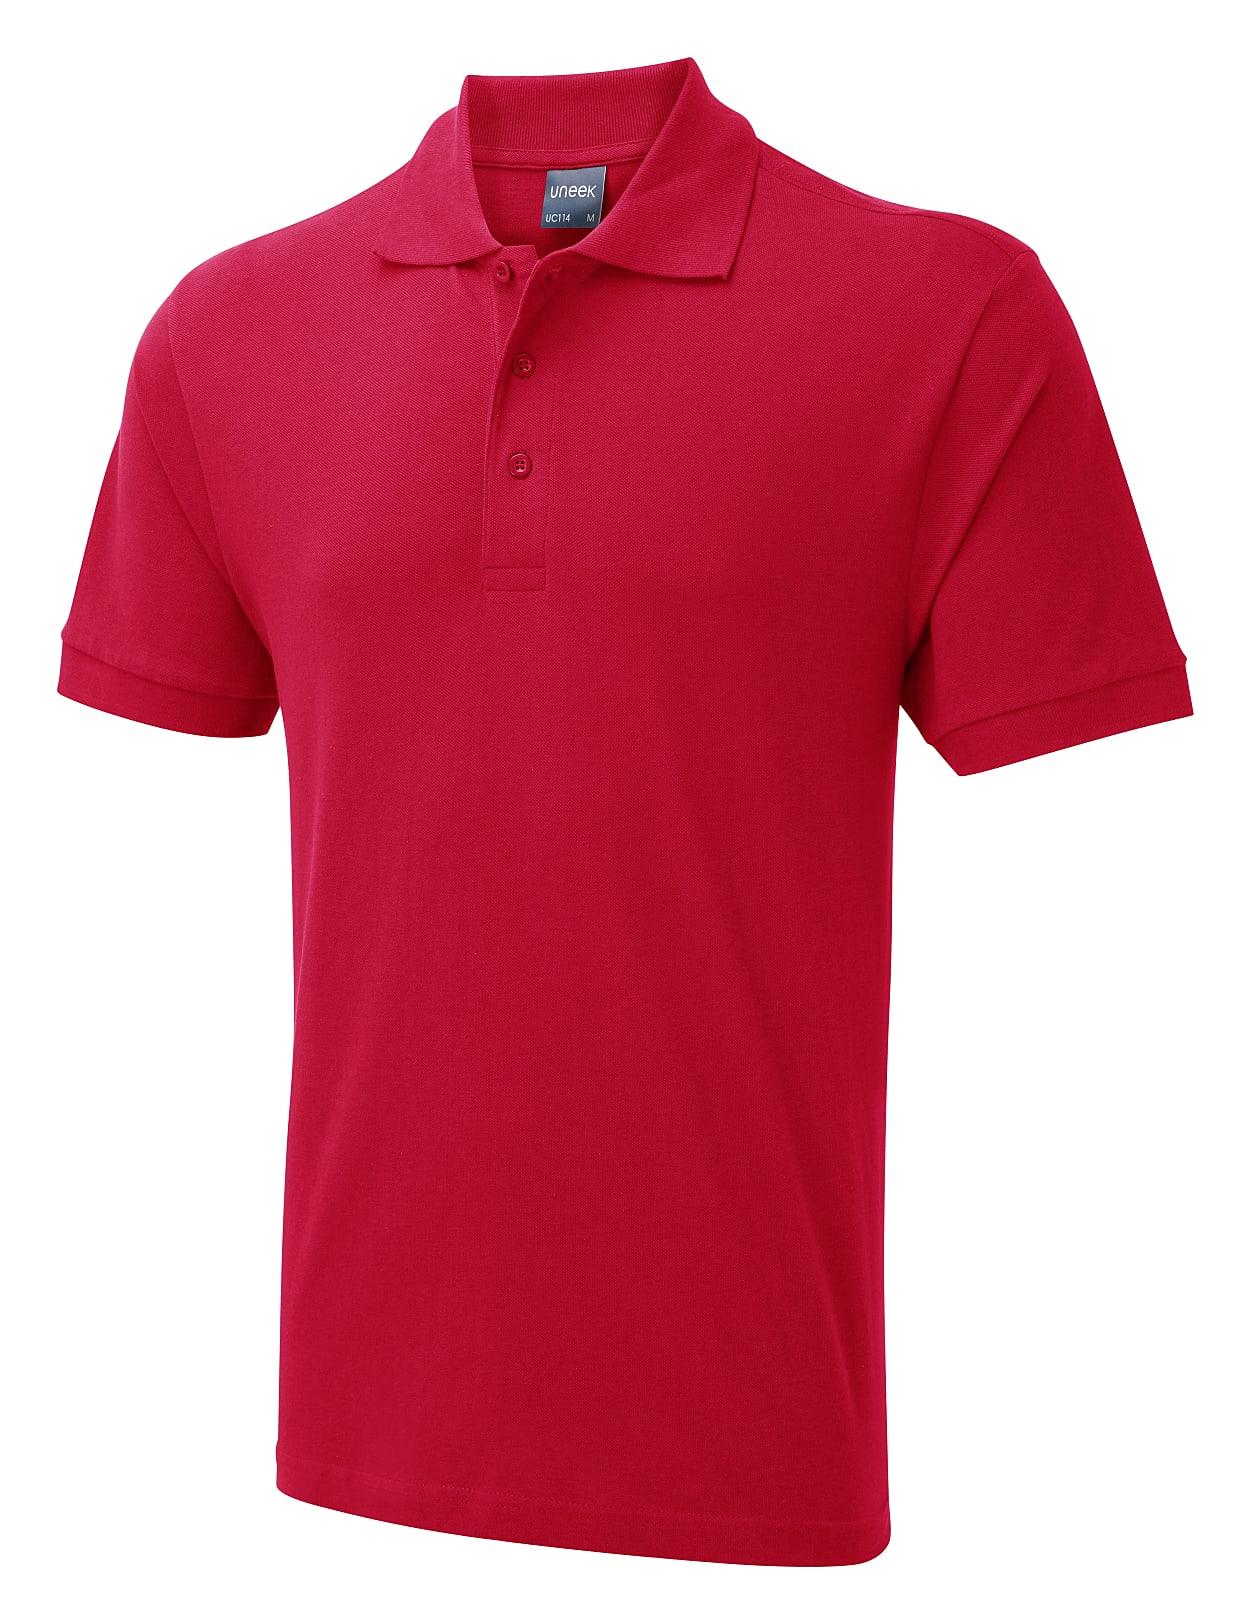 Uneek 180GSM Mens Polo Shirt in Red (Product Code: UC114)